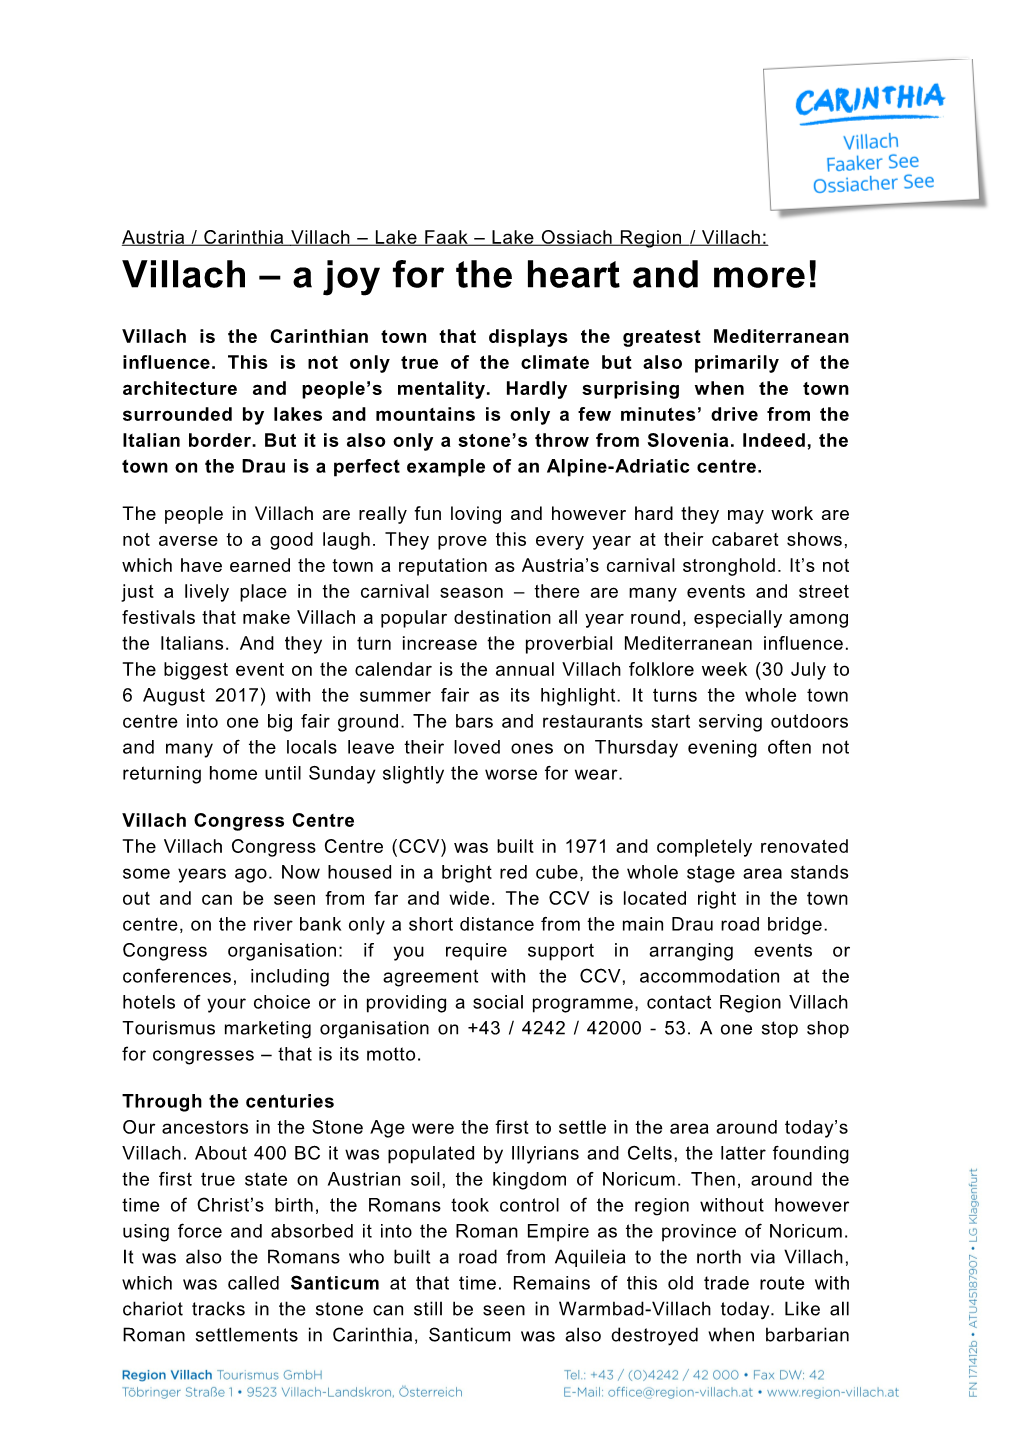 Villach a Joy for the Heart and More!